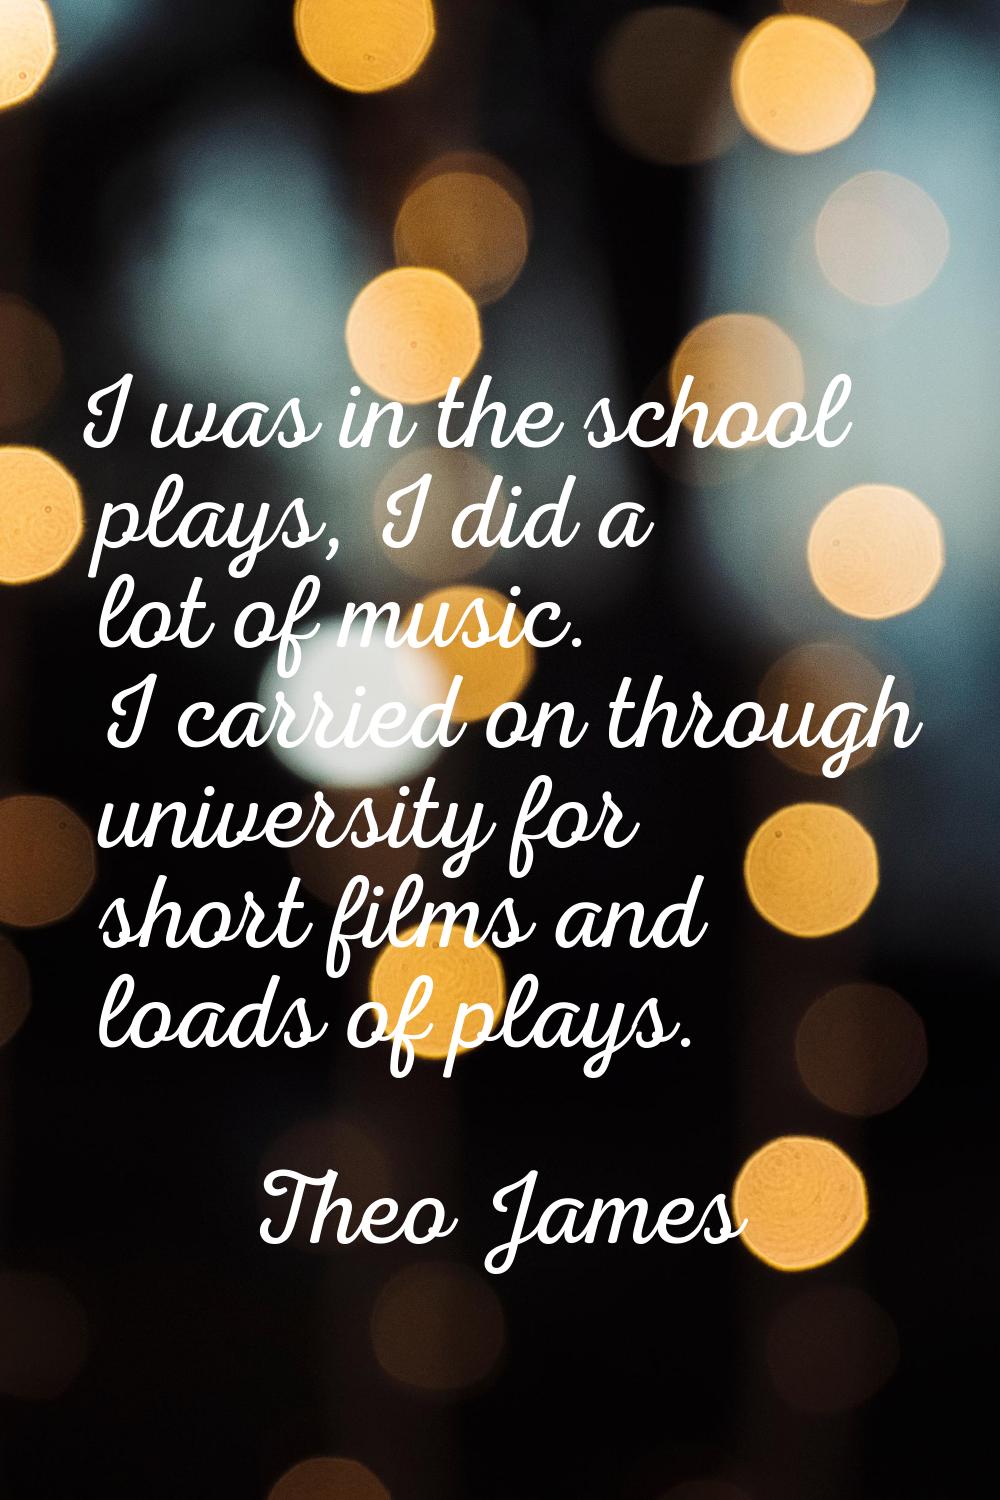 I was in the school plays, I did a lot of music. I carried on through university for short films an